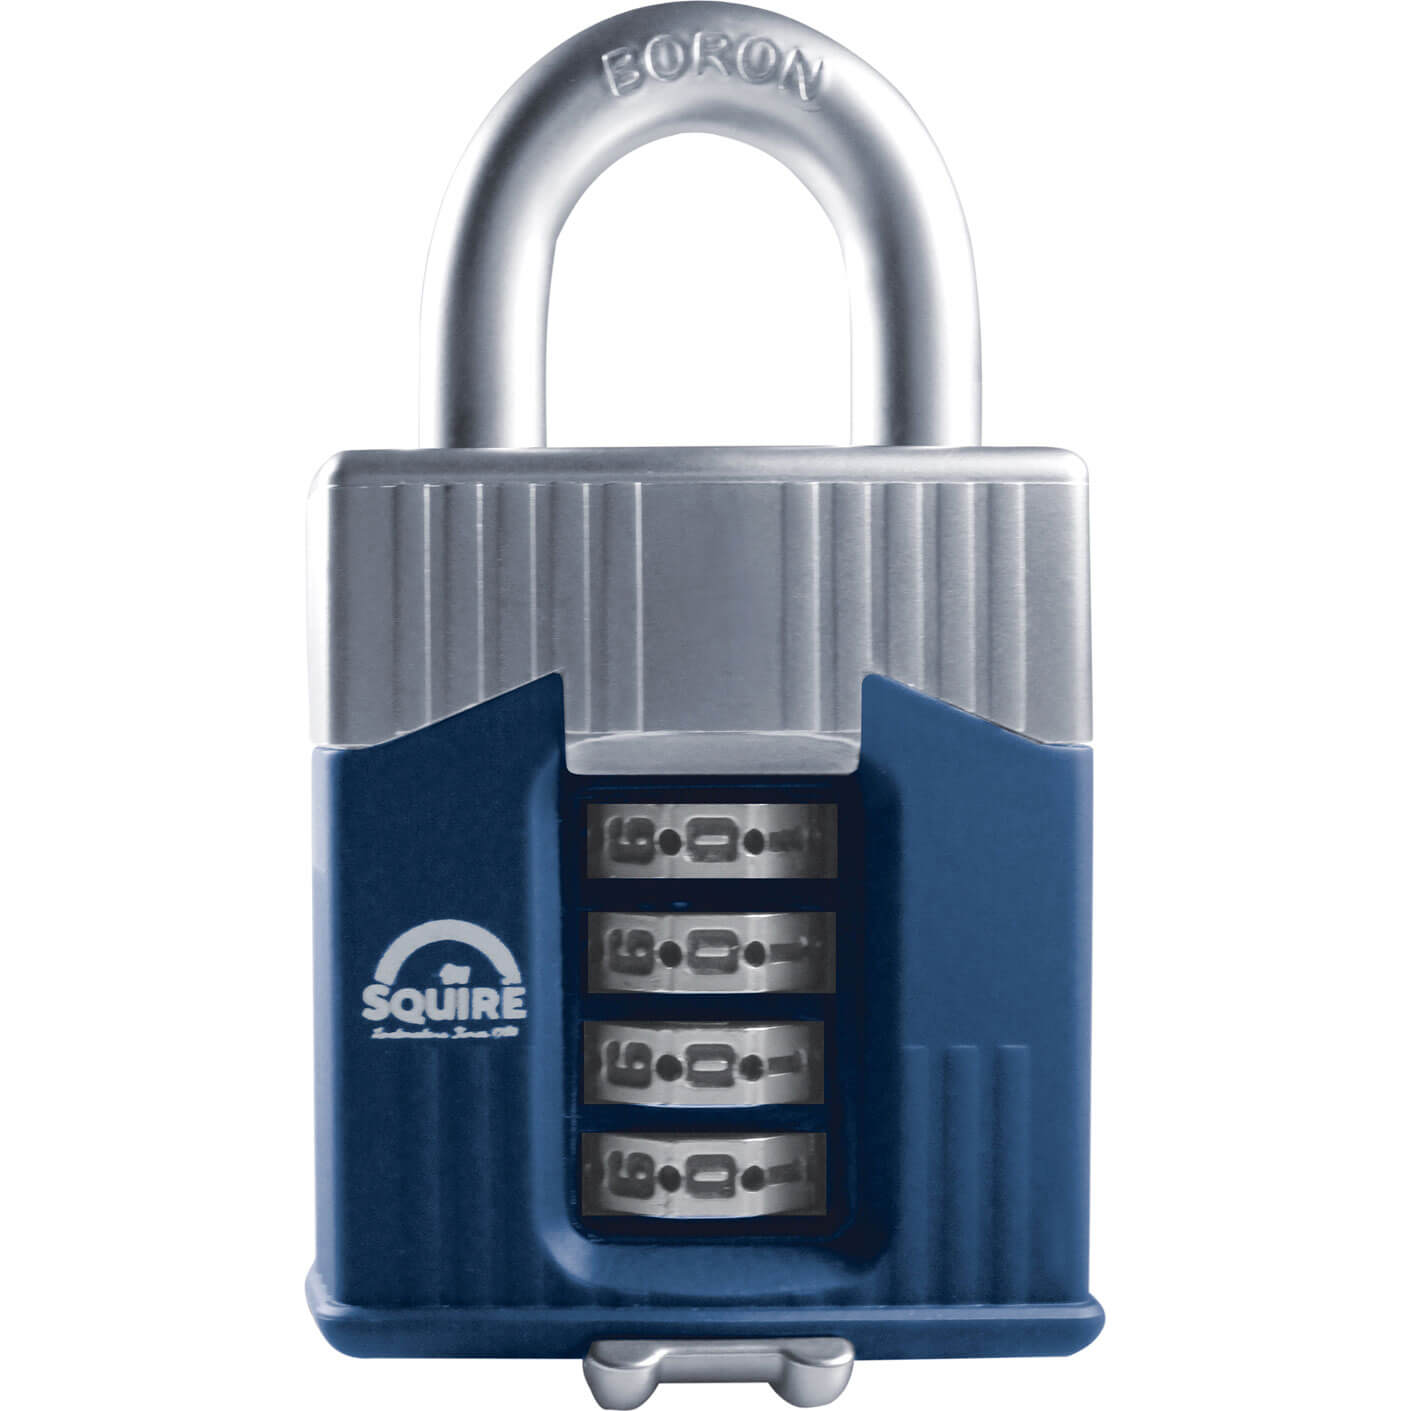 Image of Henry Squire Warrior High-Security Shackle Combination Padlock 45mm Standard